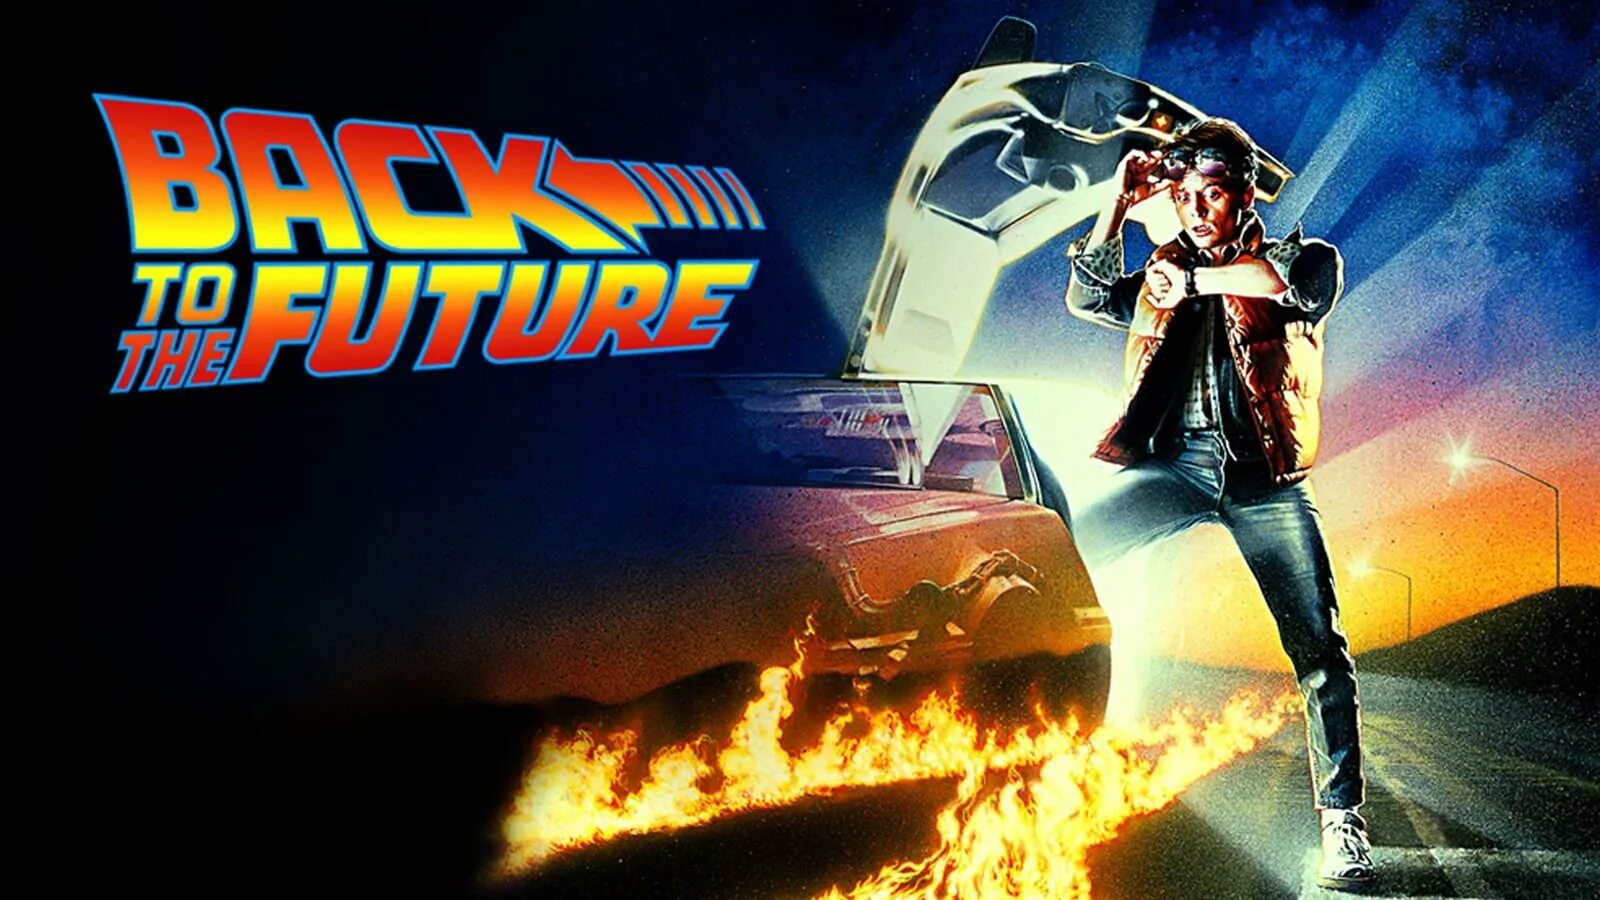 Transcending the future with. Назад в будущее back to the Future 1985. Назад в будущее 1985 Постер. Назад в будущее 1 Постер.